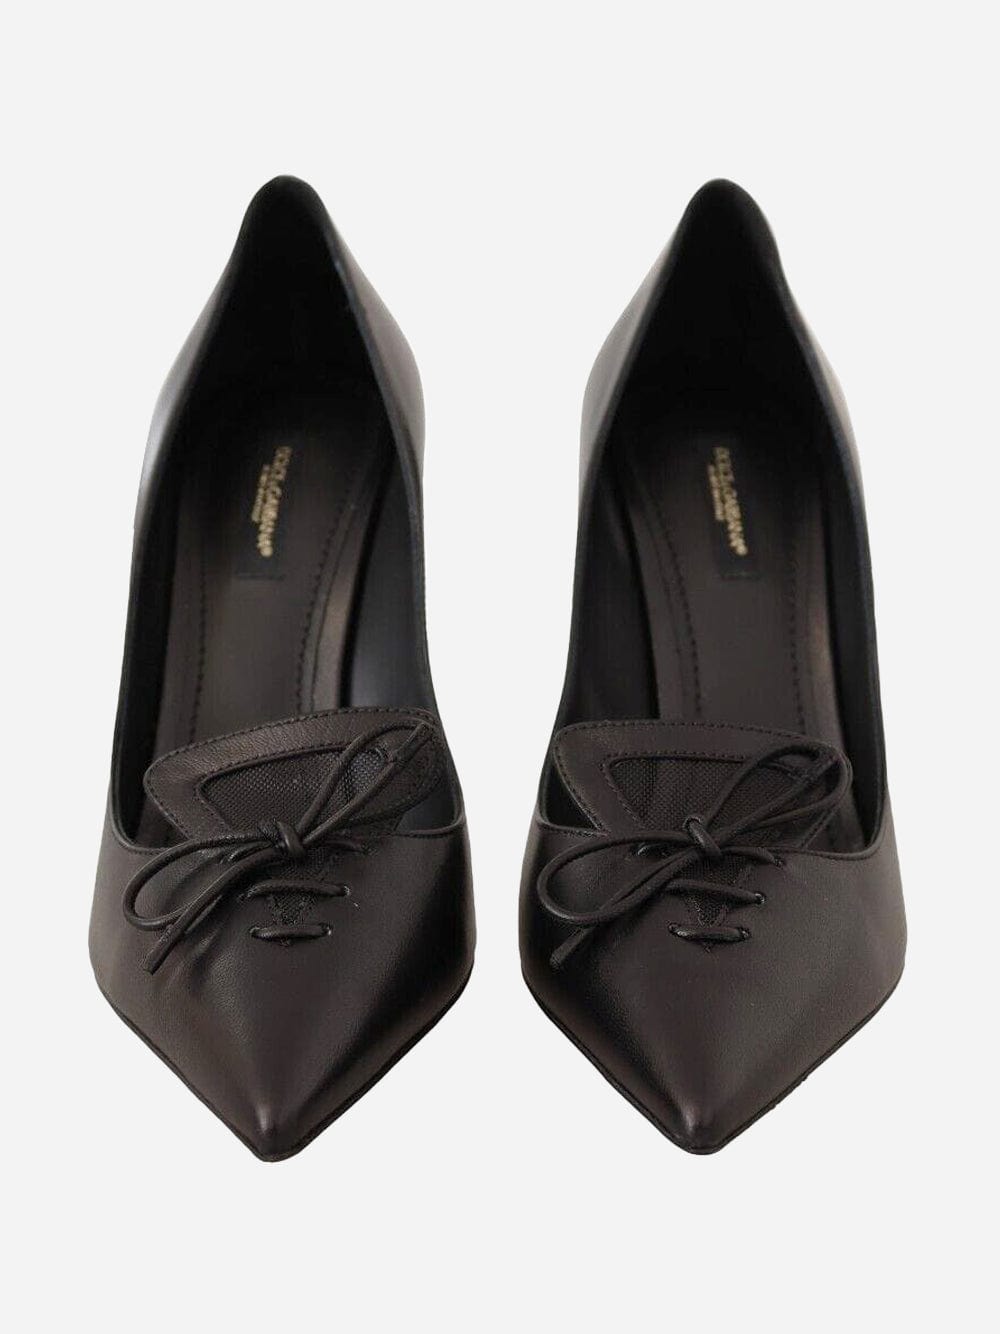 Dolce & Gabbana Pointed Toe Pumps